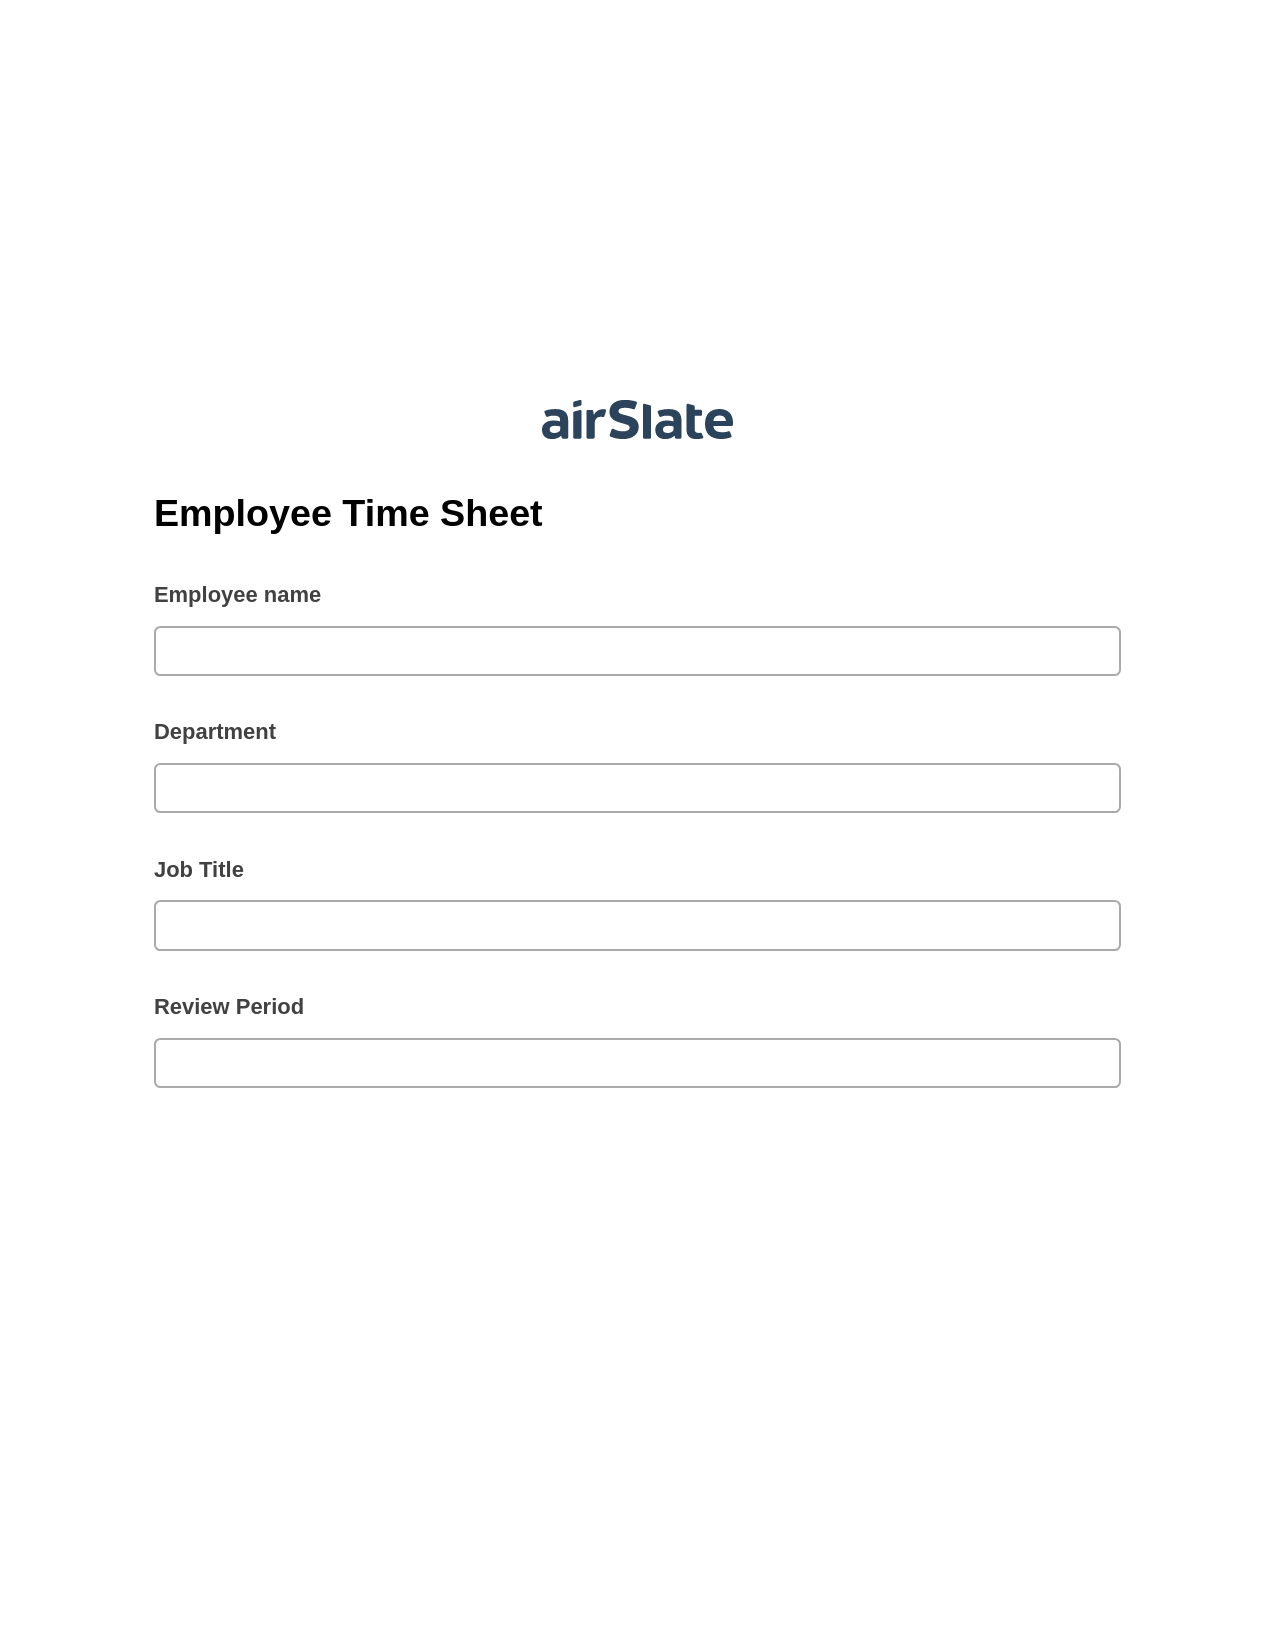 Employee Time Sheet Pre-fill from MS Dynamics 365 Records, Create slate addon, Archive to OneDrive Bot